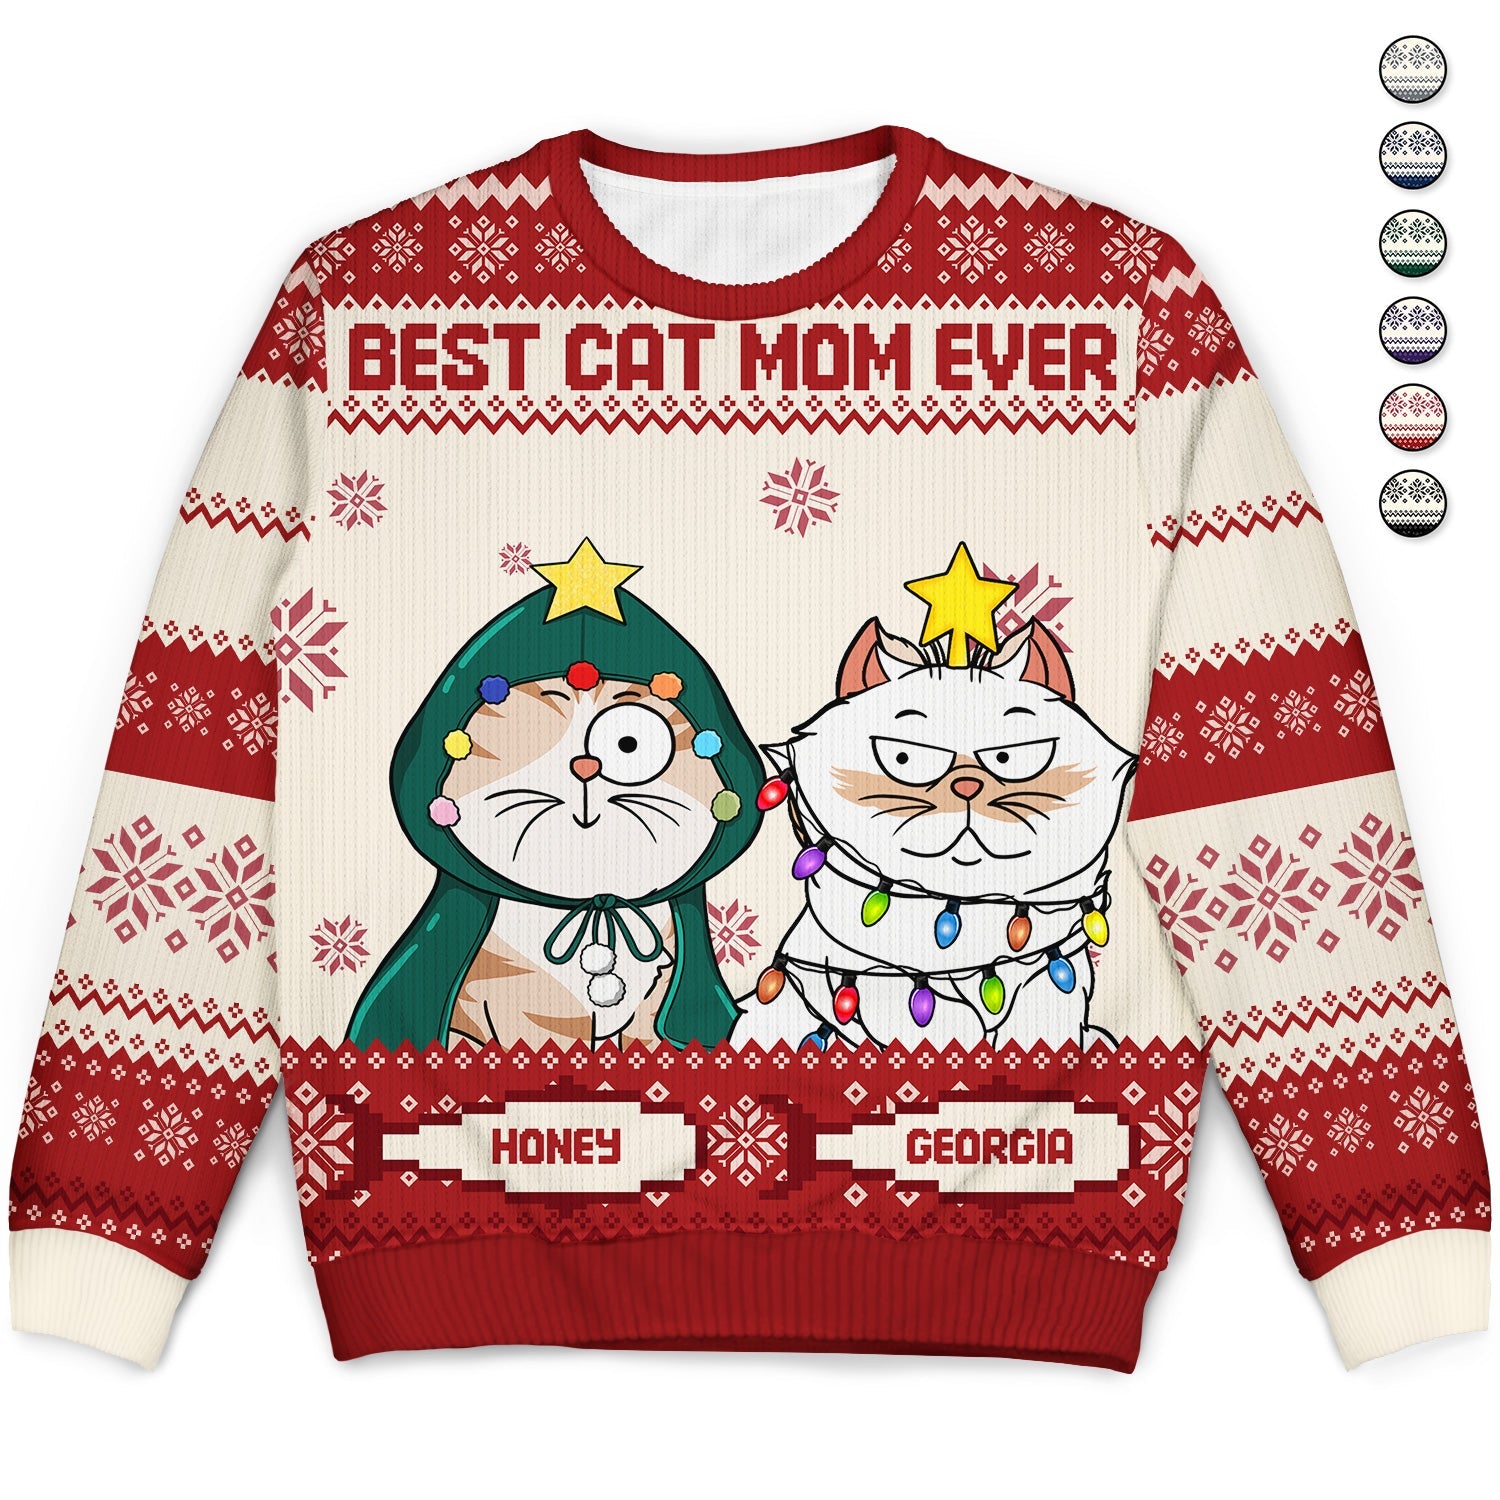 Best Cat Mom Ever - Christmas Gift, Gift For Cat Lovers, Cat Mom, Cat Dad, Pet Lovers - Personalized Unisex Ugly Sweater